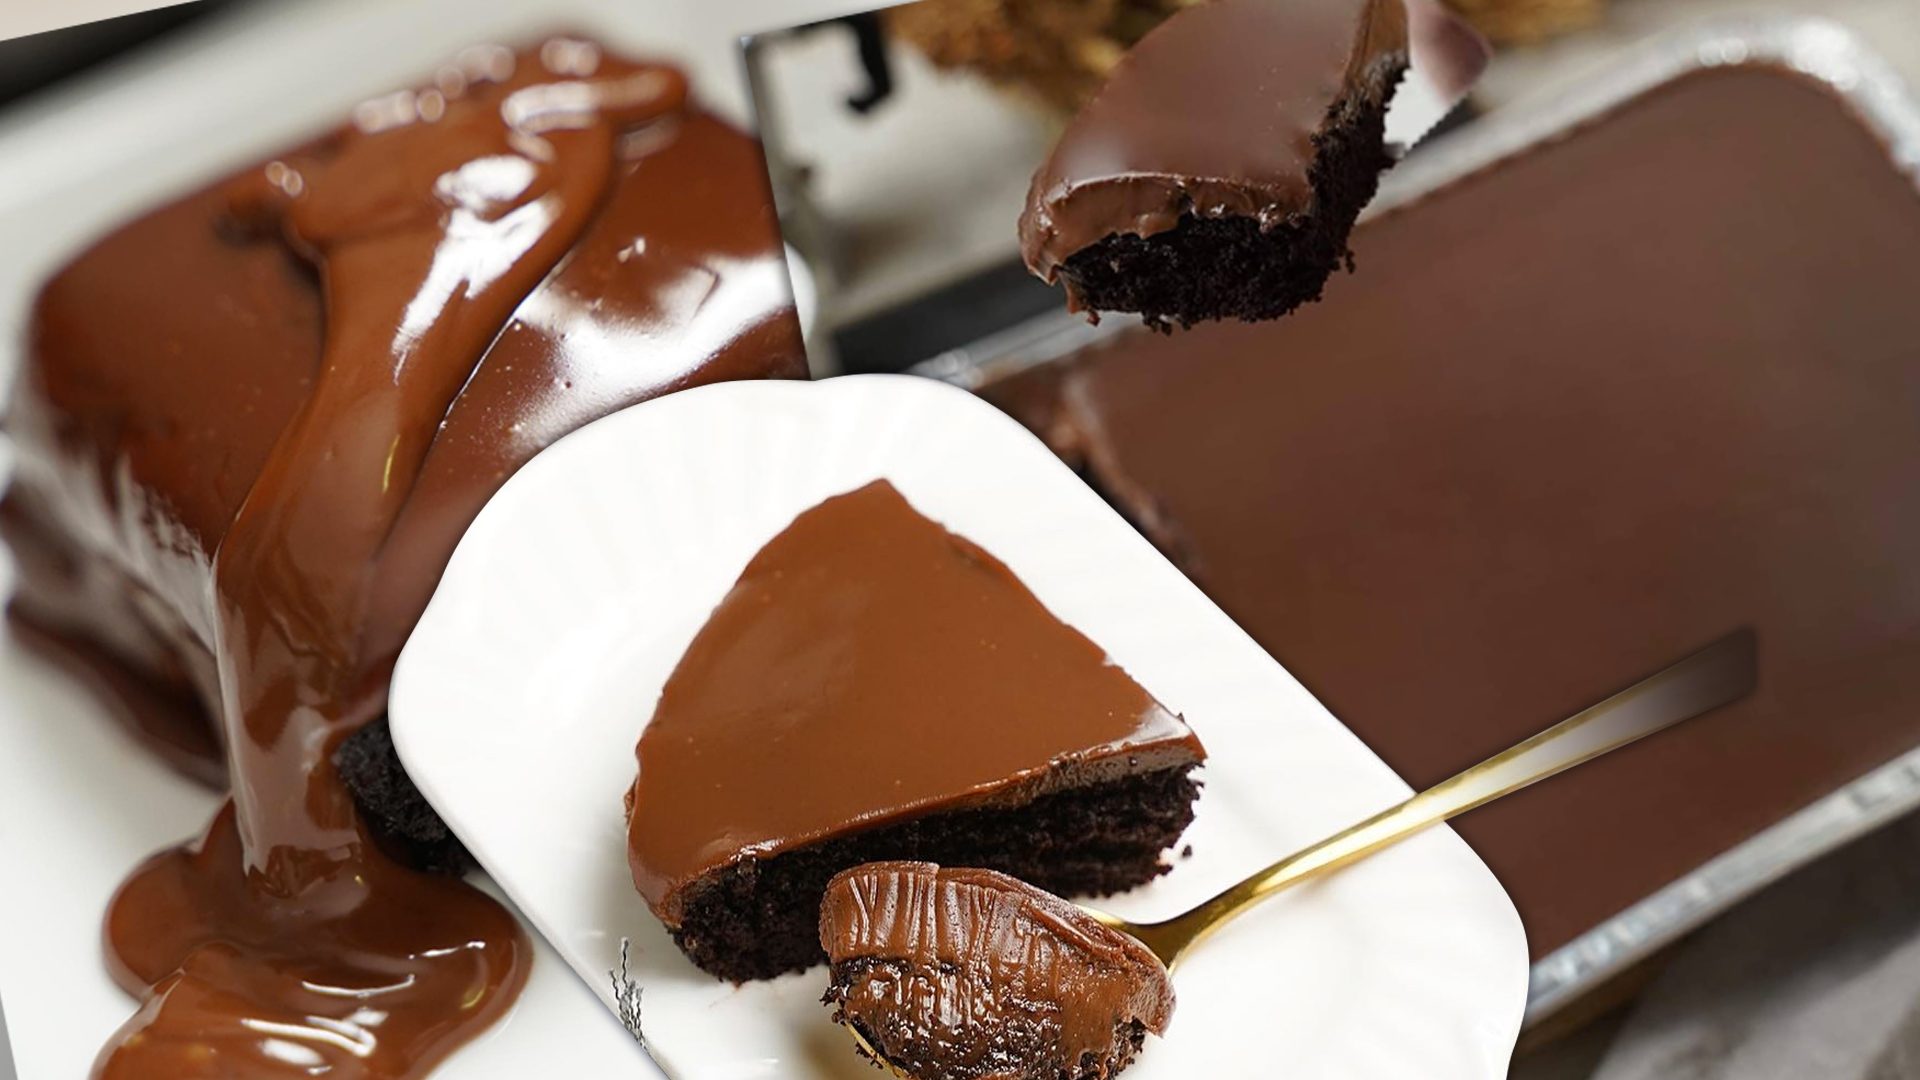 Try this simple yet sinful chocolate cake by a stay-at-home mom in Las Piñas City